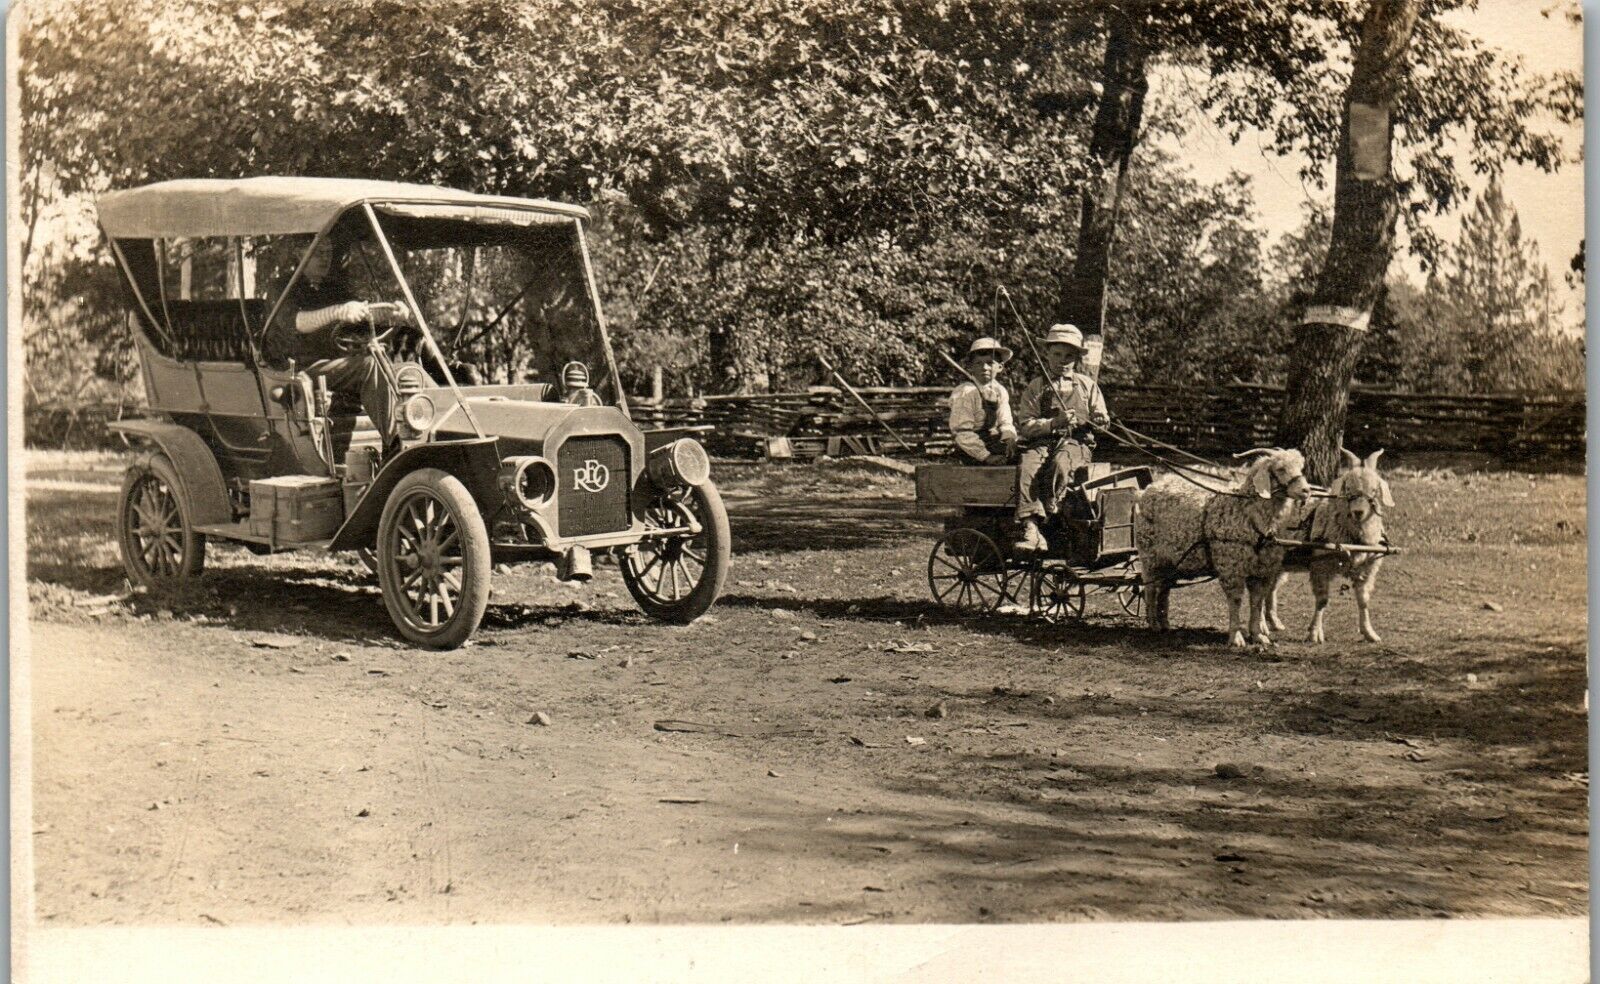 REO Car Owner 1906 with Goat Wagon and two boys Meridian ID Vintage Postcard RR1